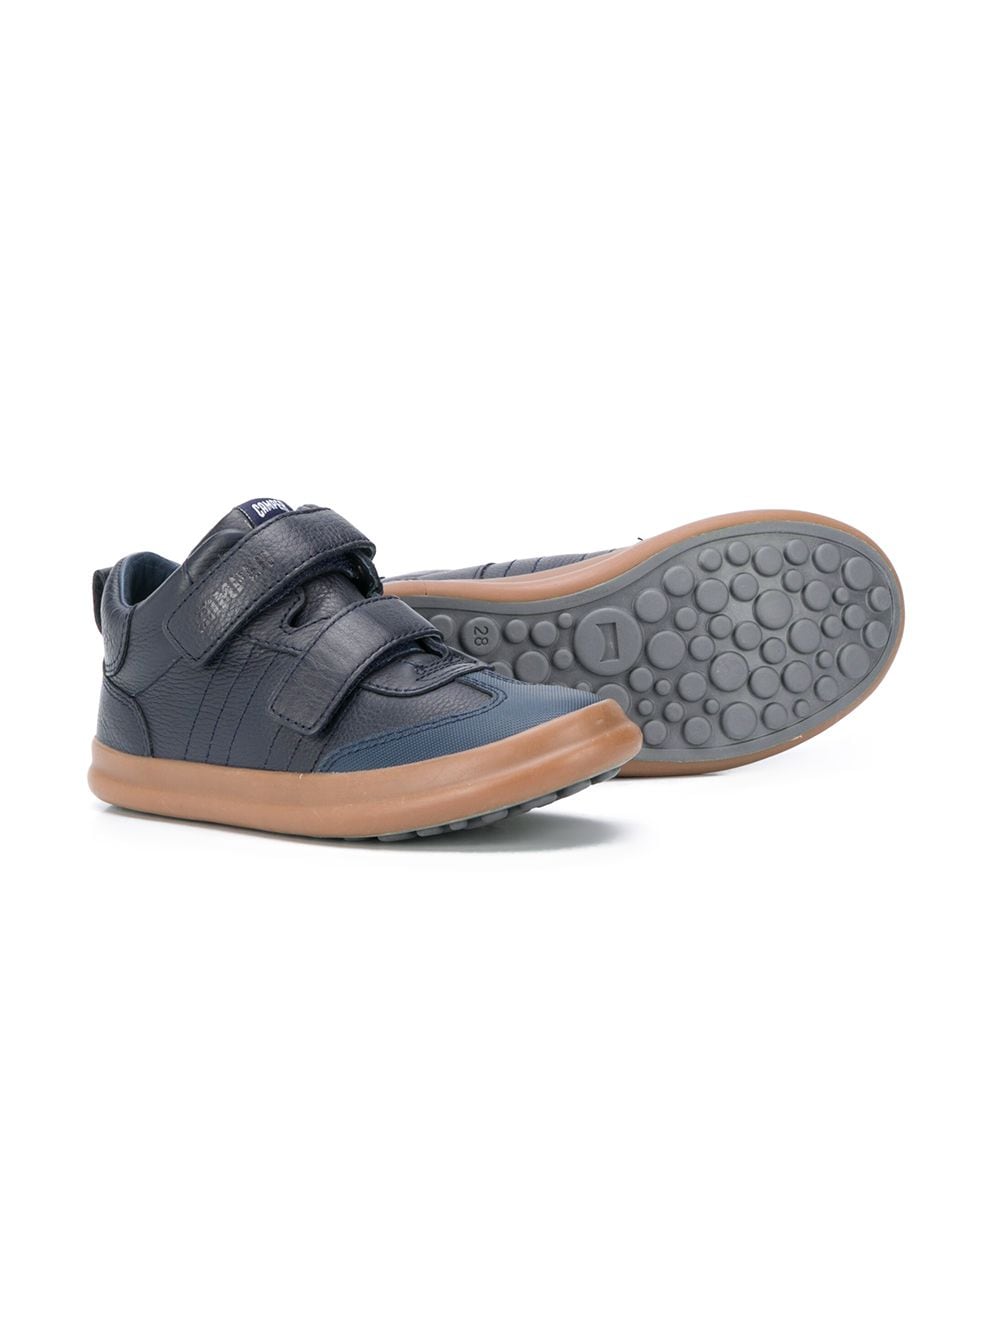 Image 2 of Camper Kids Pursuit touch-strap sneakers